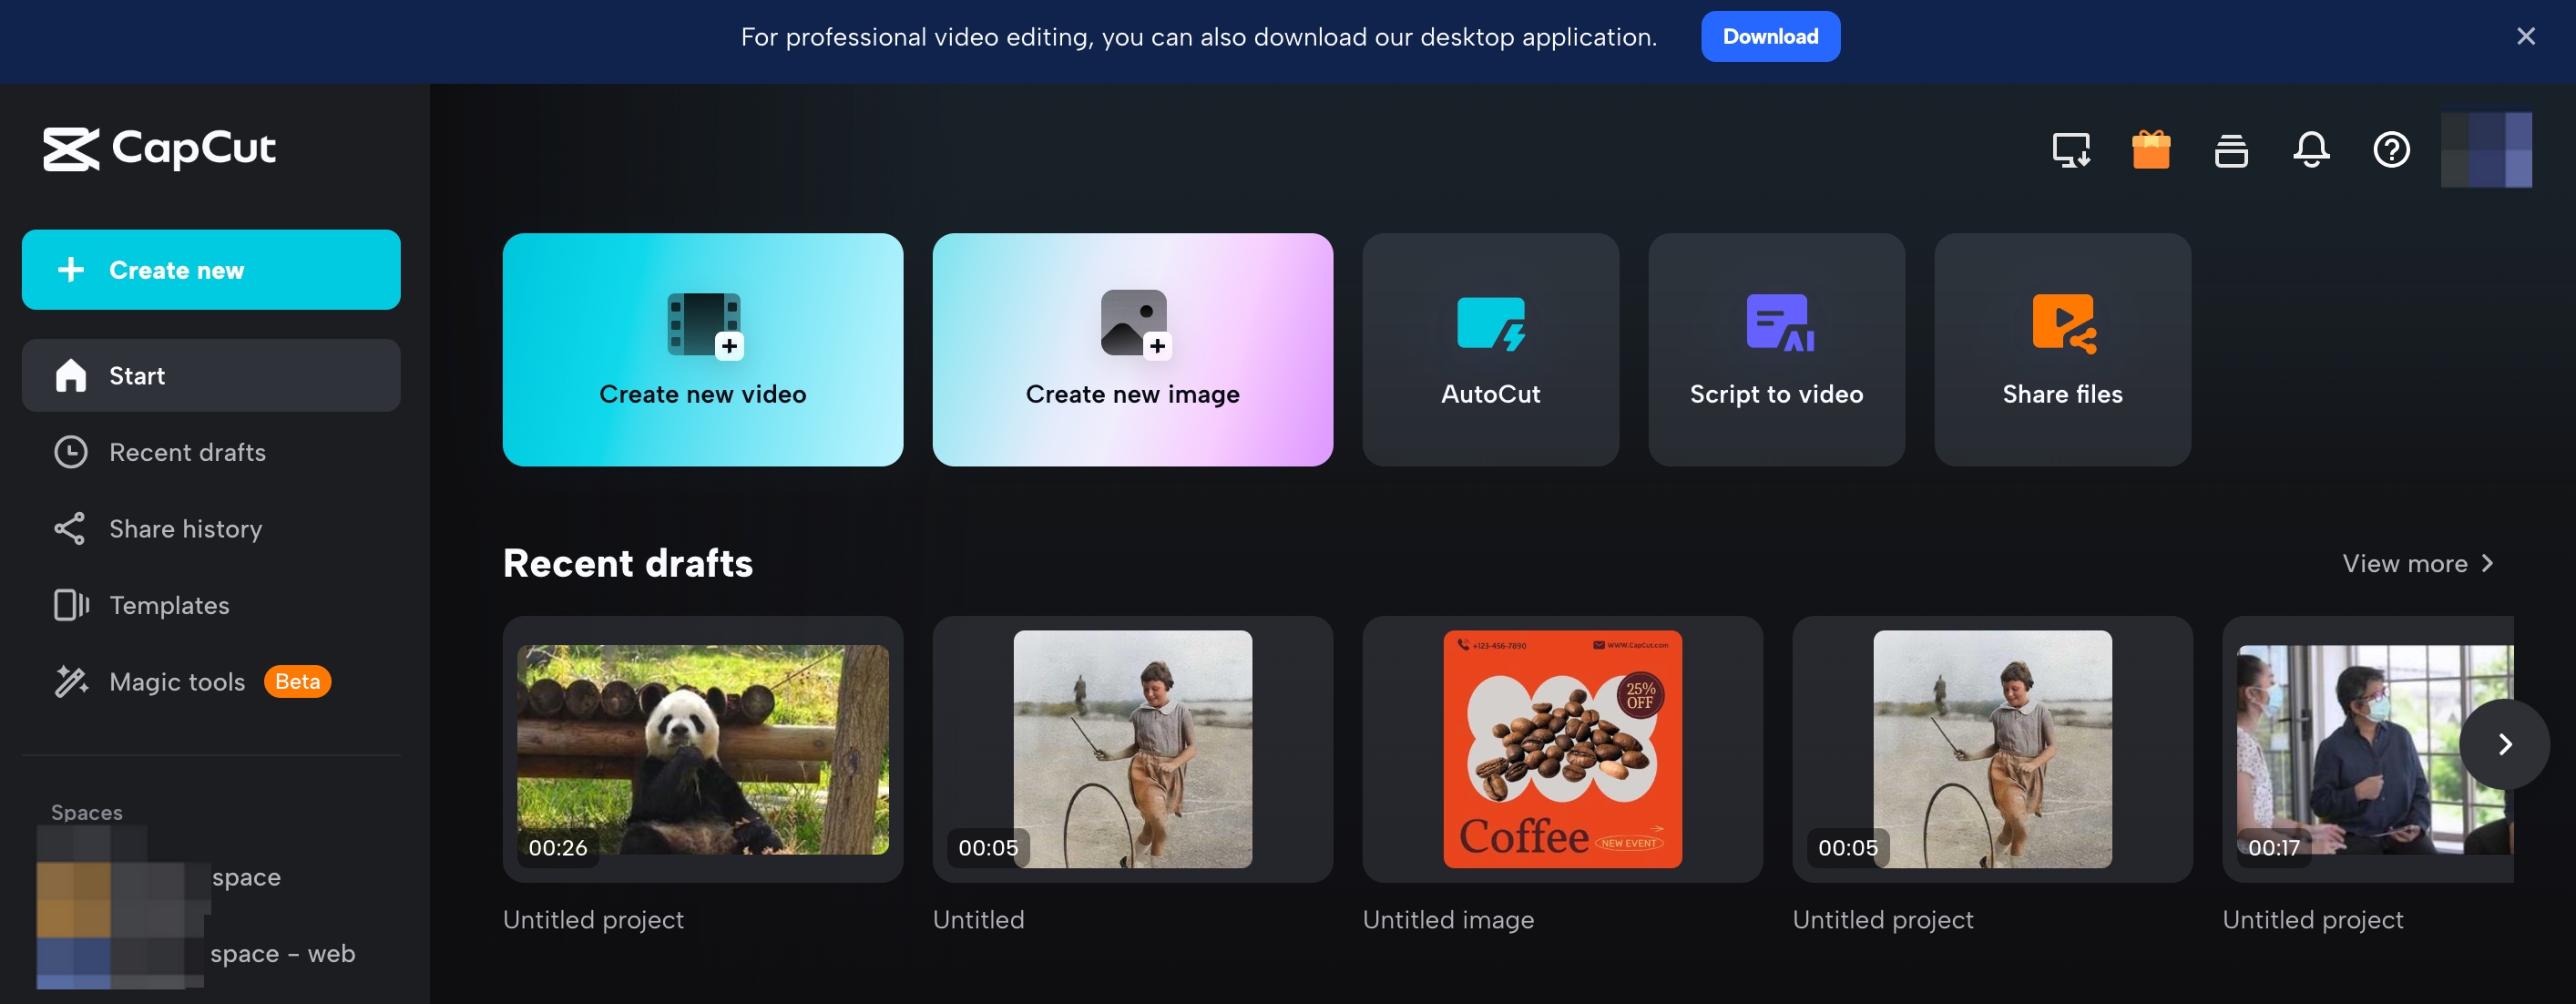 CapCut: Your all-in-one video editing solution